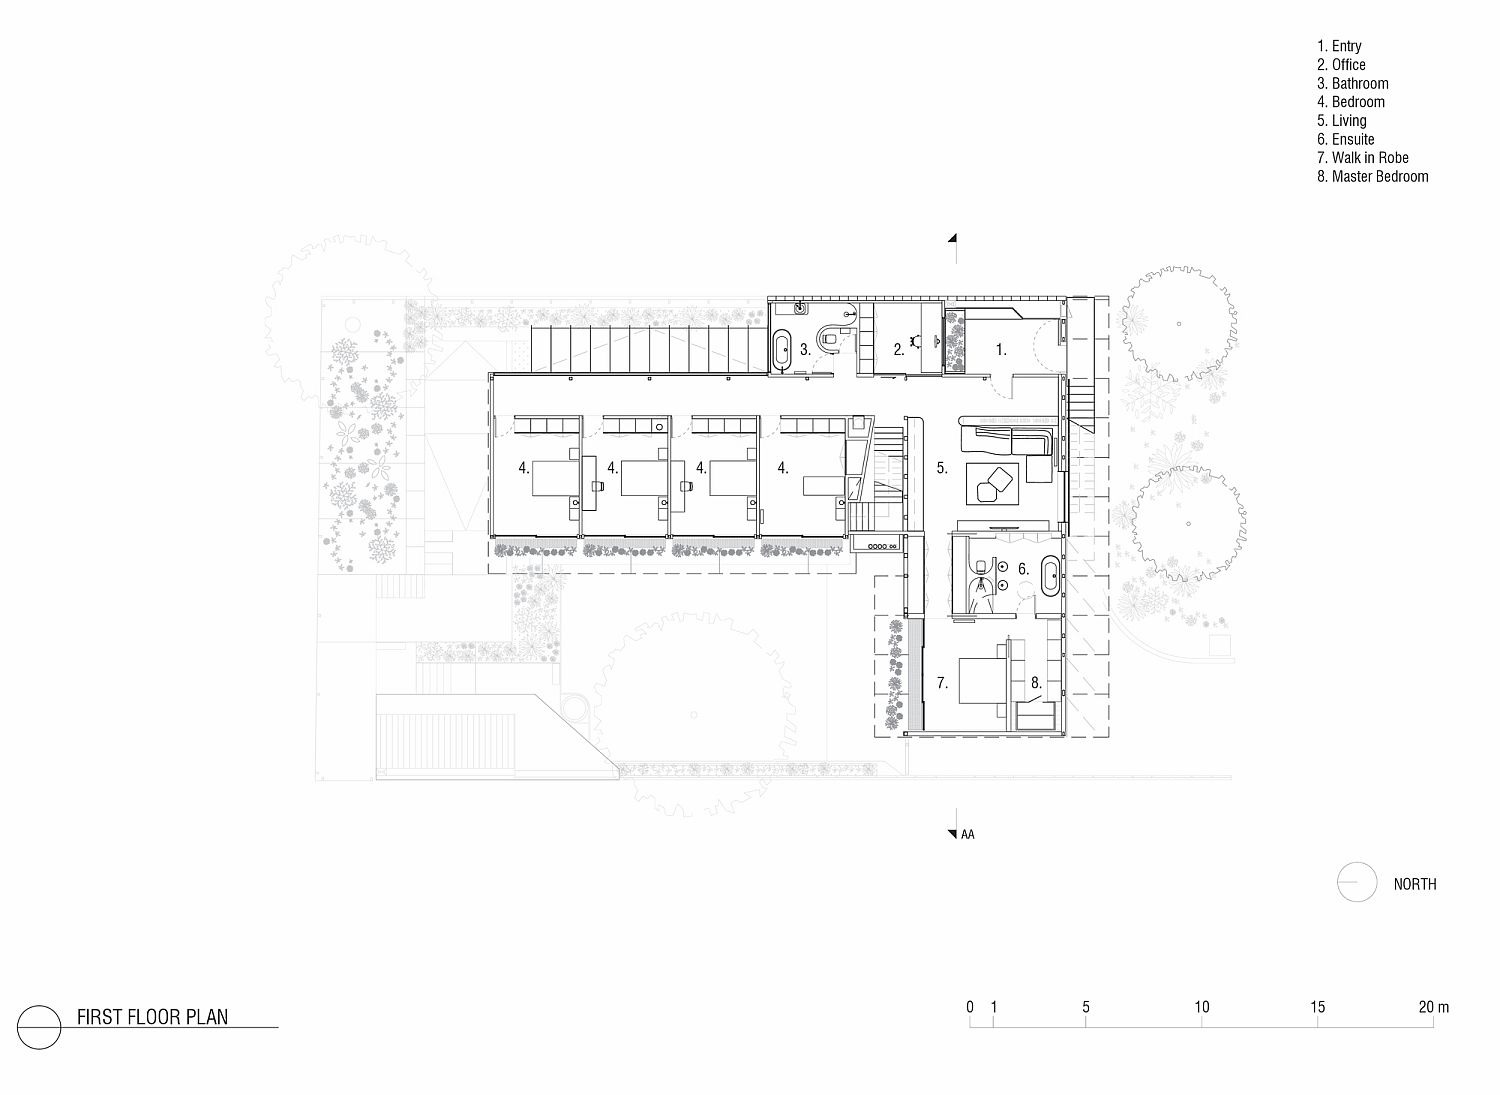 First level floor plan of the Aussie house